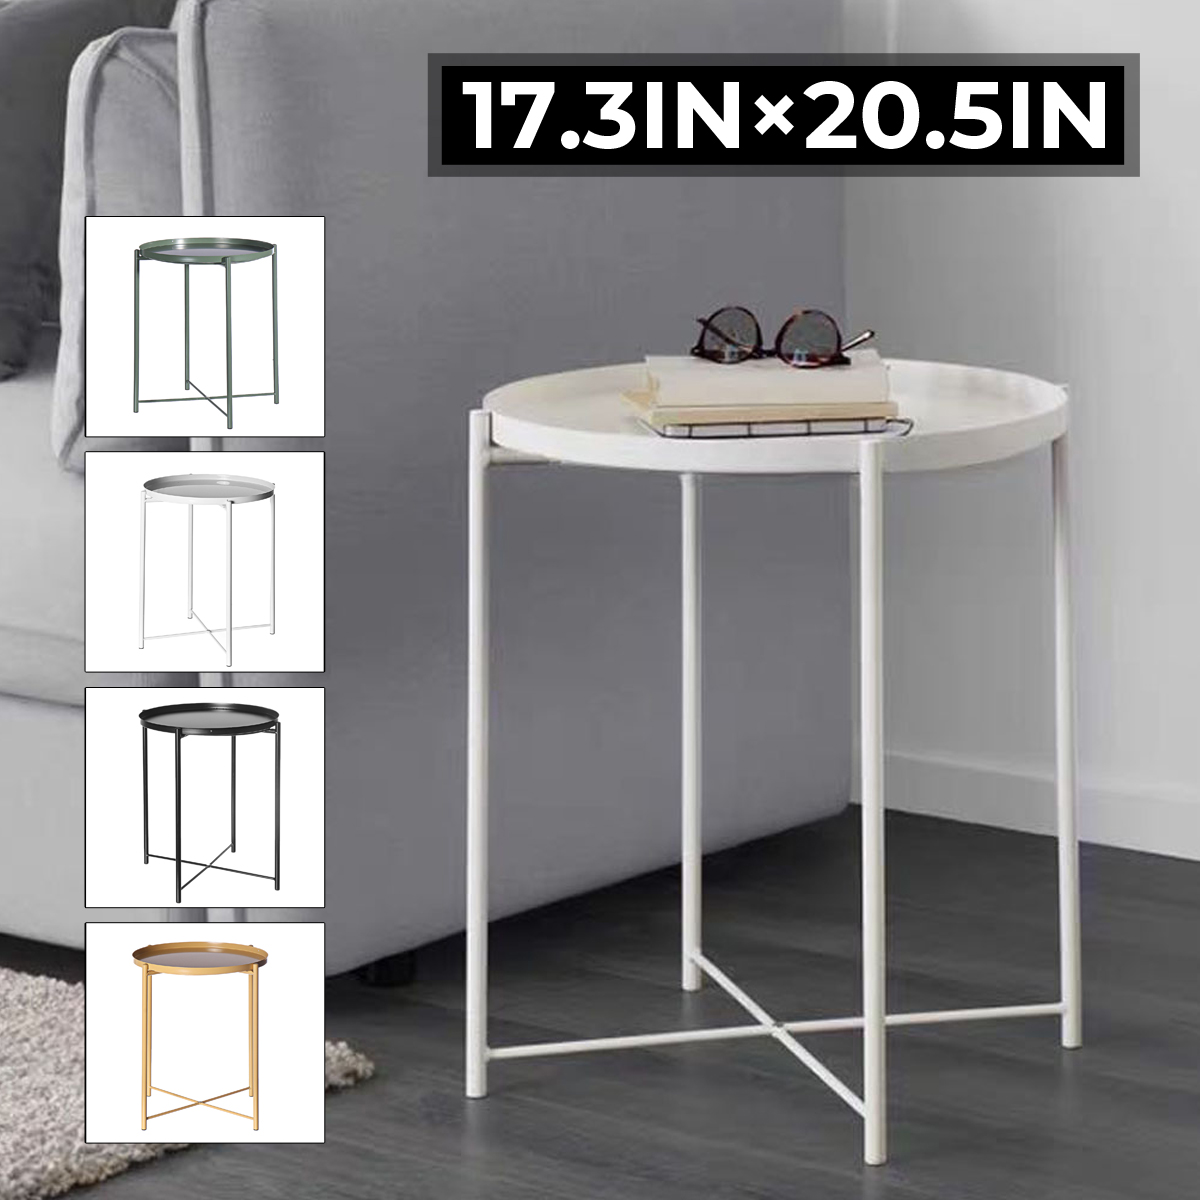 4452cm-Round-Side-End-Coffee-Table-Steel-Tray-Metal-Side-Desk-Furniture-for-Home-Bedside-Storage-Sup-1767827-1